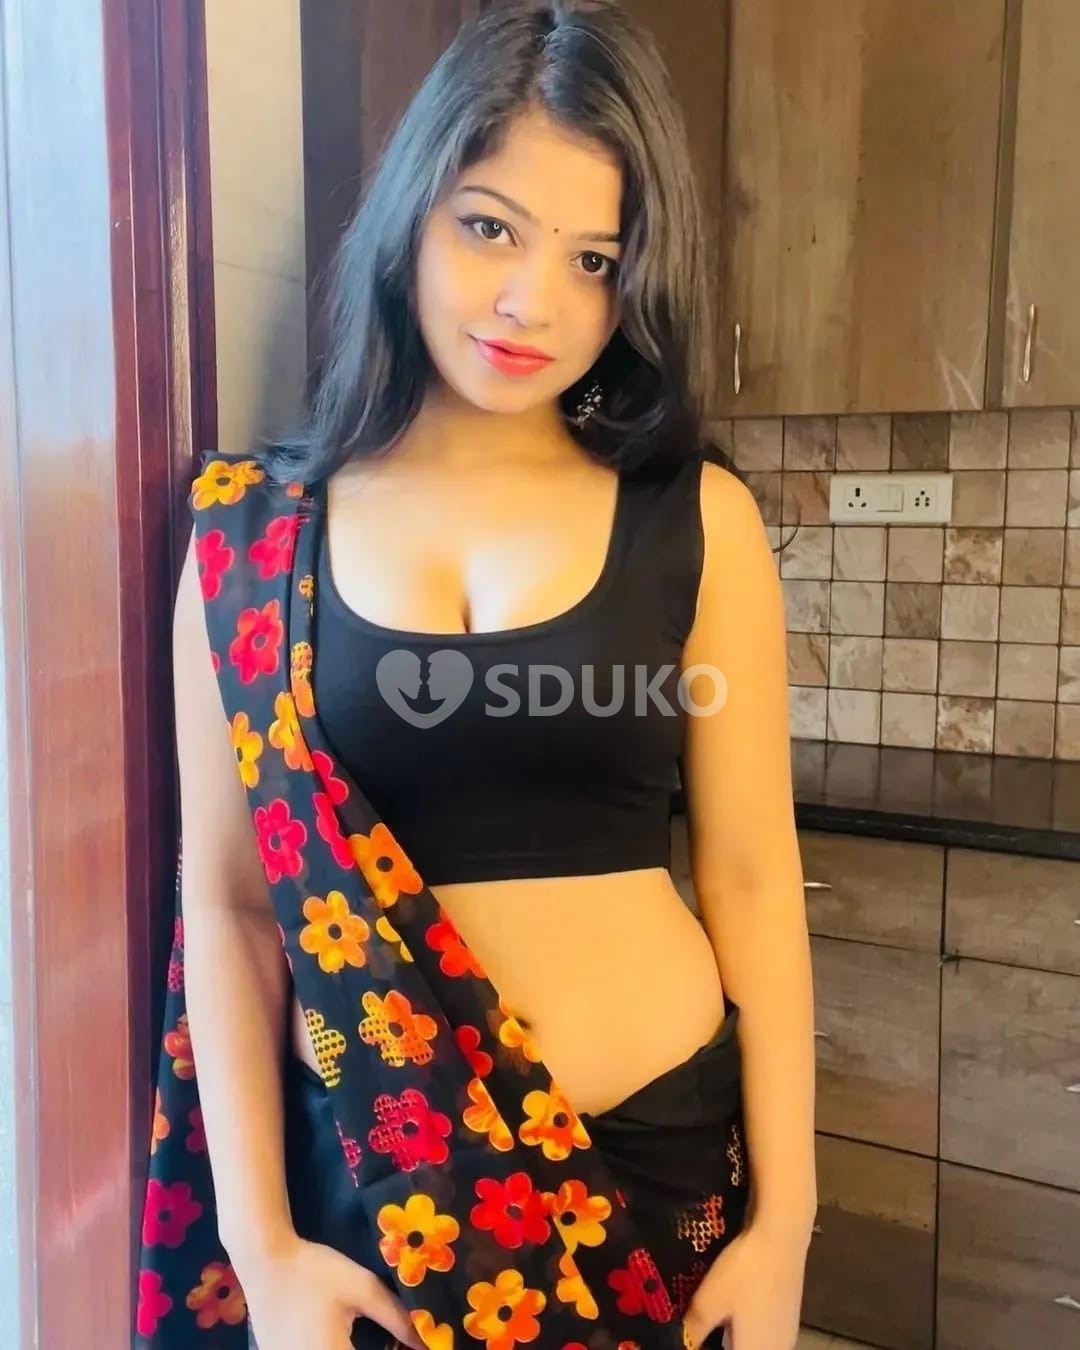 `(GUNTUR ALL AREA)❣️BEST VIP HOT COLLEGE GIRL GENUINE SERVICE PROVIDE UNLIMITED SHOTS ALL TYPE SEX ALLOW BOOK NOW AN